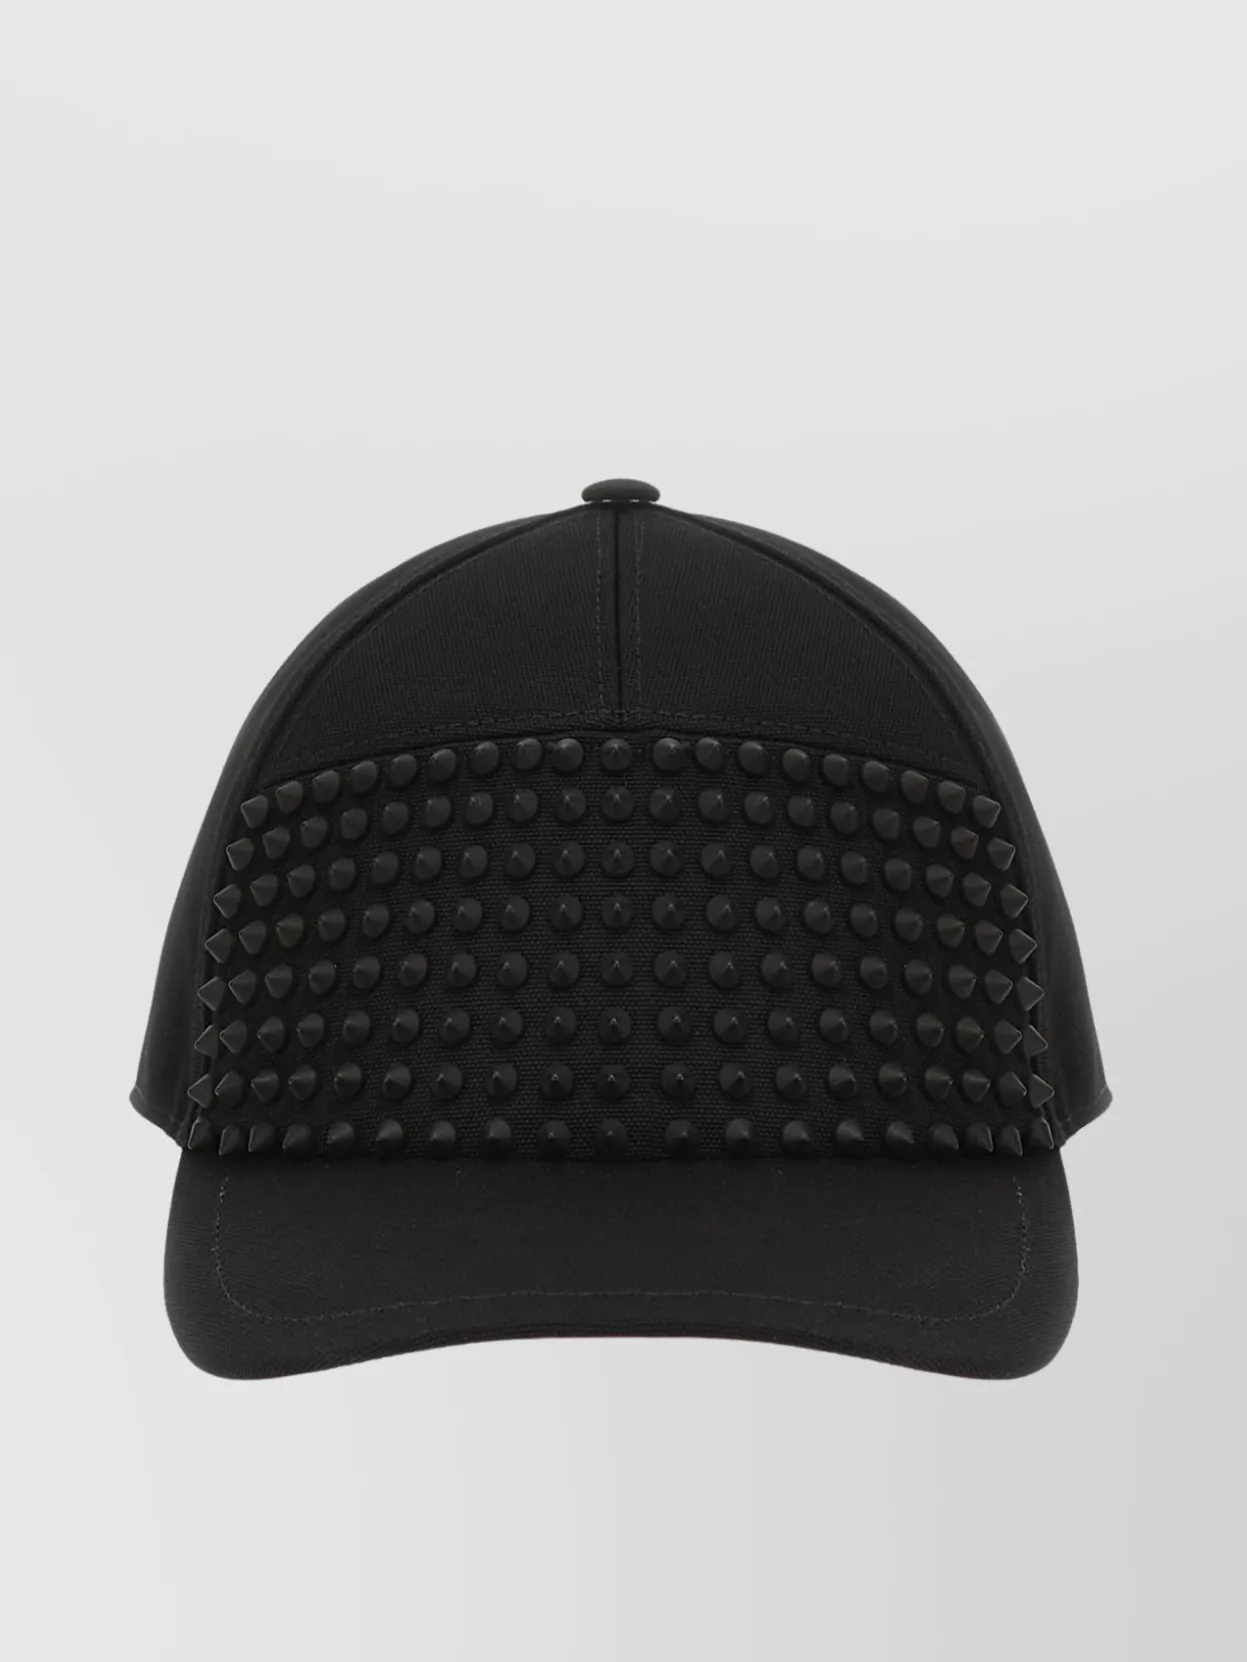 Christian Louboutin Spike Studded Cap Curved Brim In Black